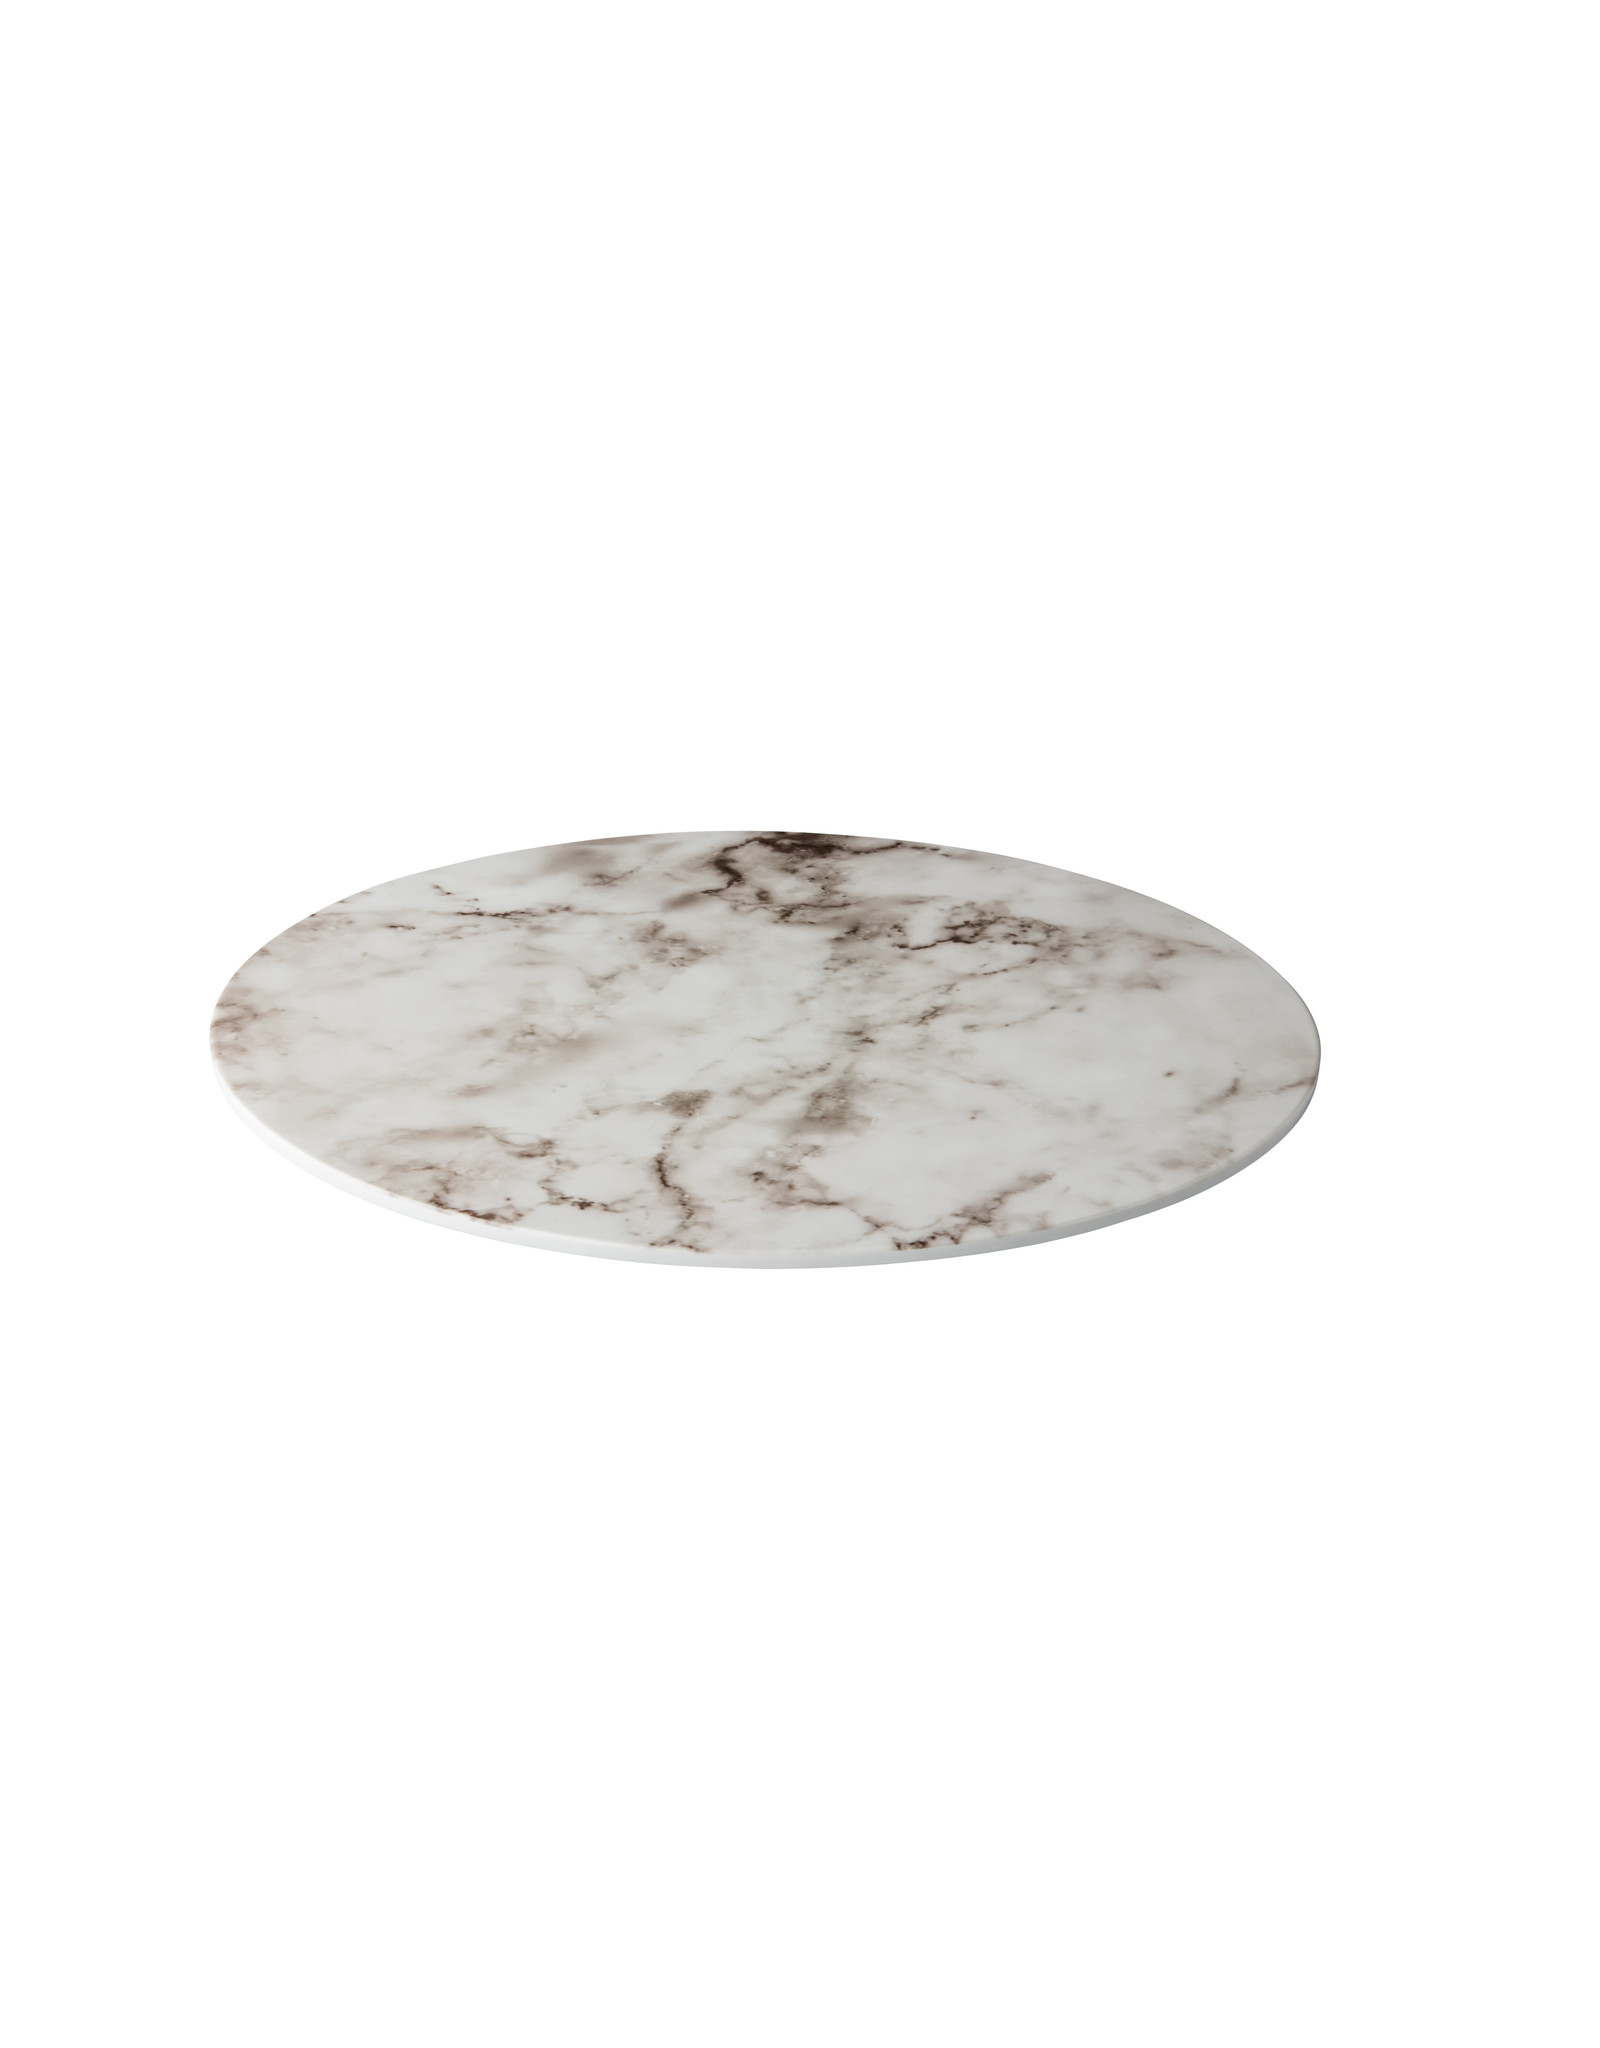 Stylepoint Plateau marble white round 33cm